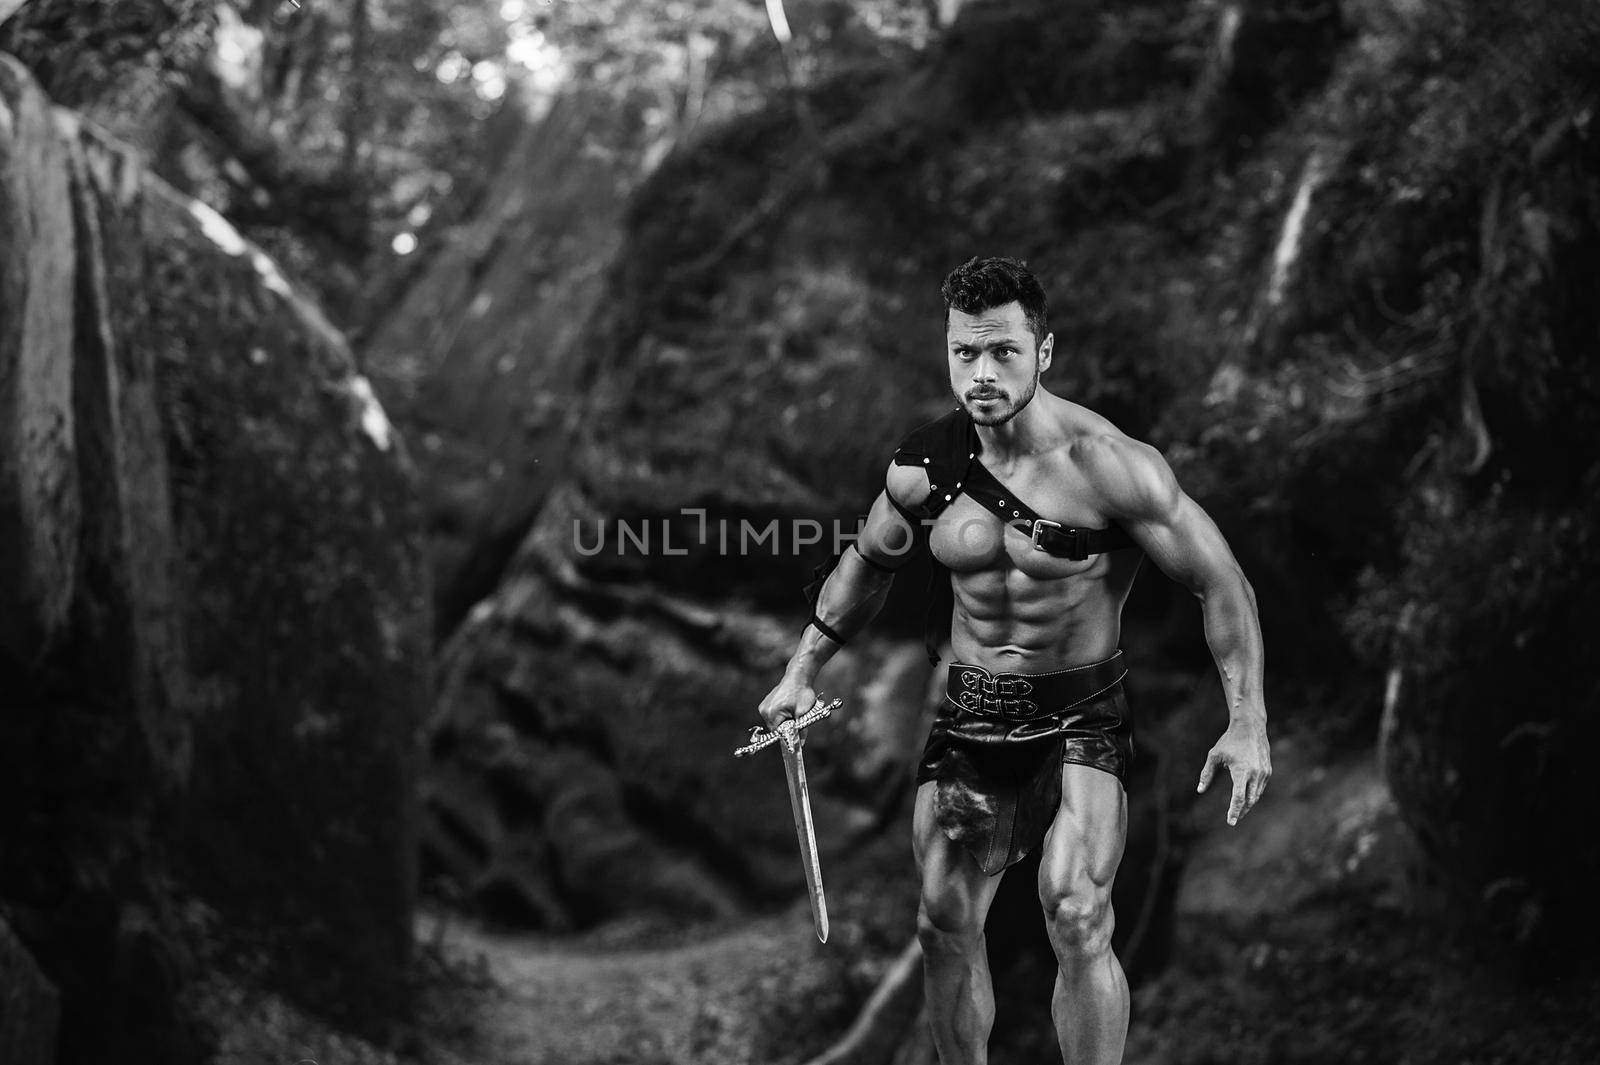 Come at me. Monochrome shot of a young manly gladiator holding a sword ready to fight near the rocks